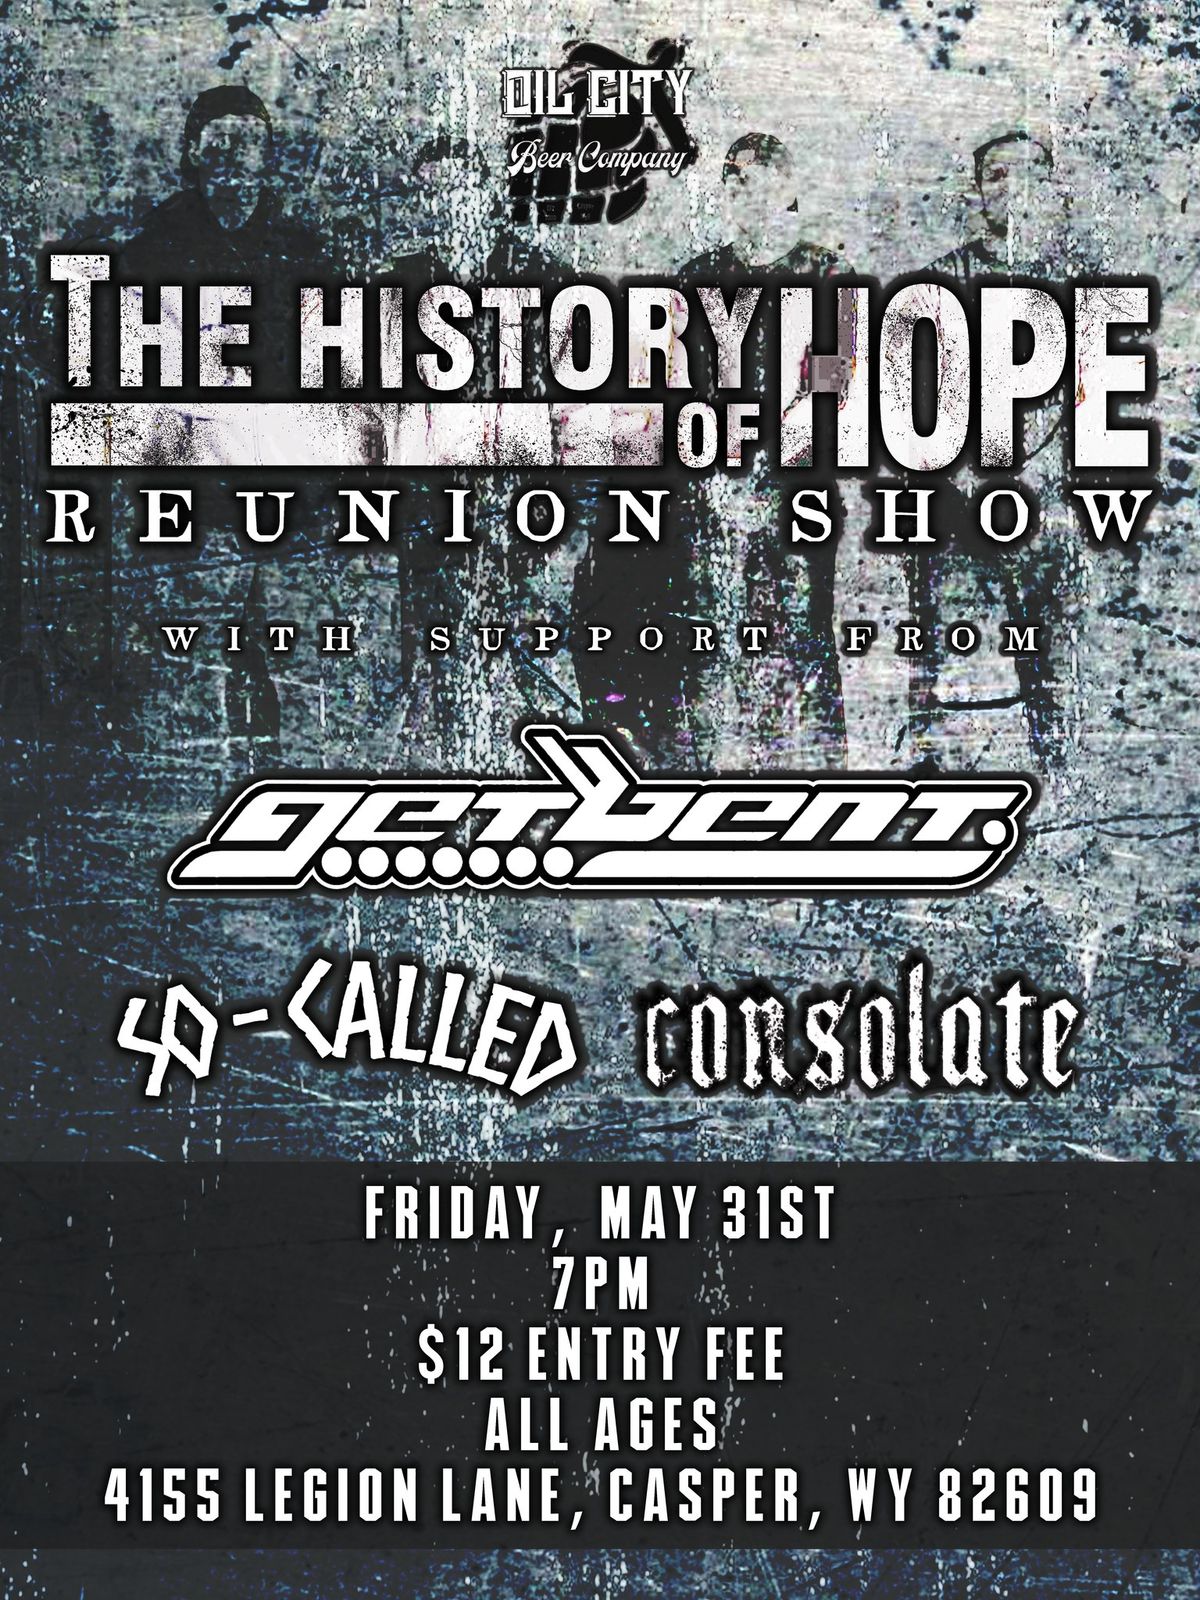 The History of Hope Reunion with So-Called, getbent, & Consolate